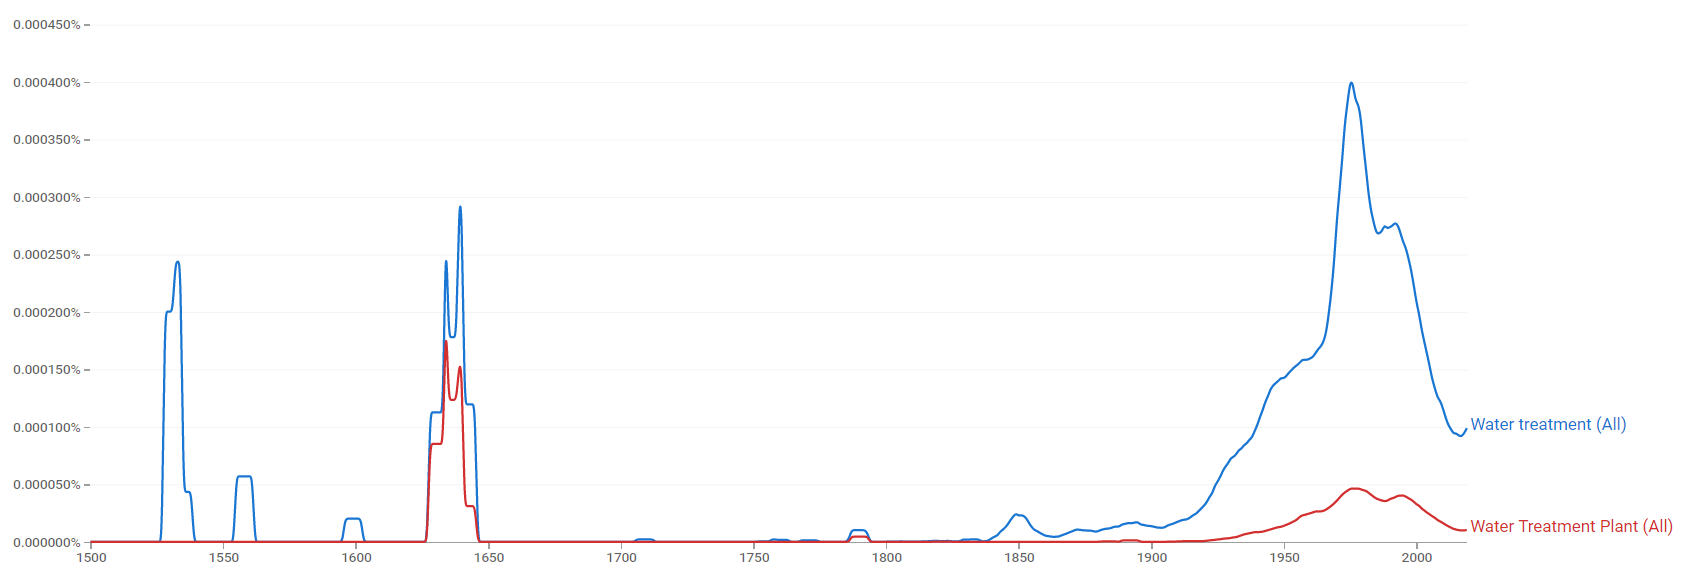 Water treatment and Water Treatment Plant ngram.png